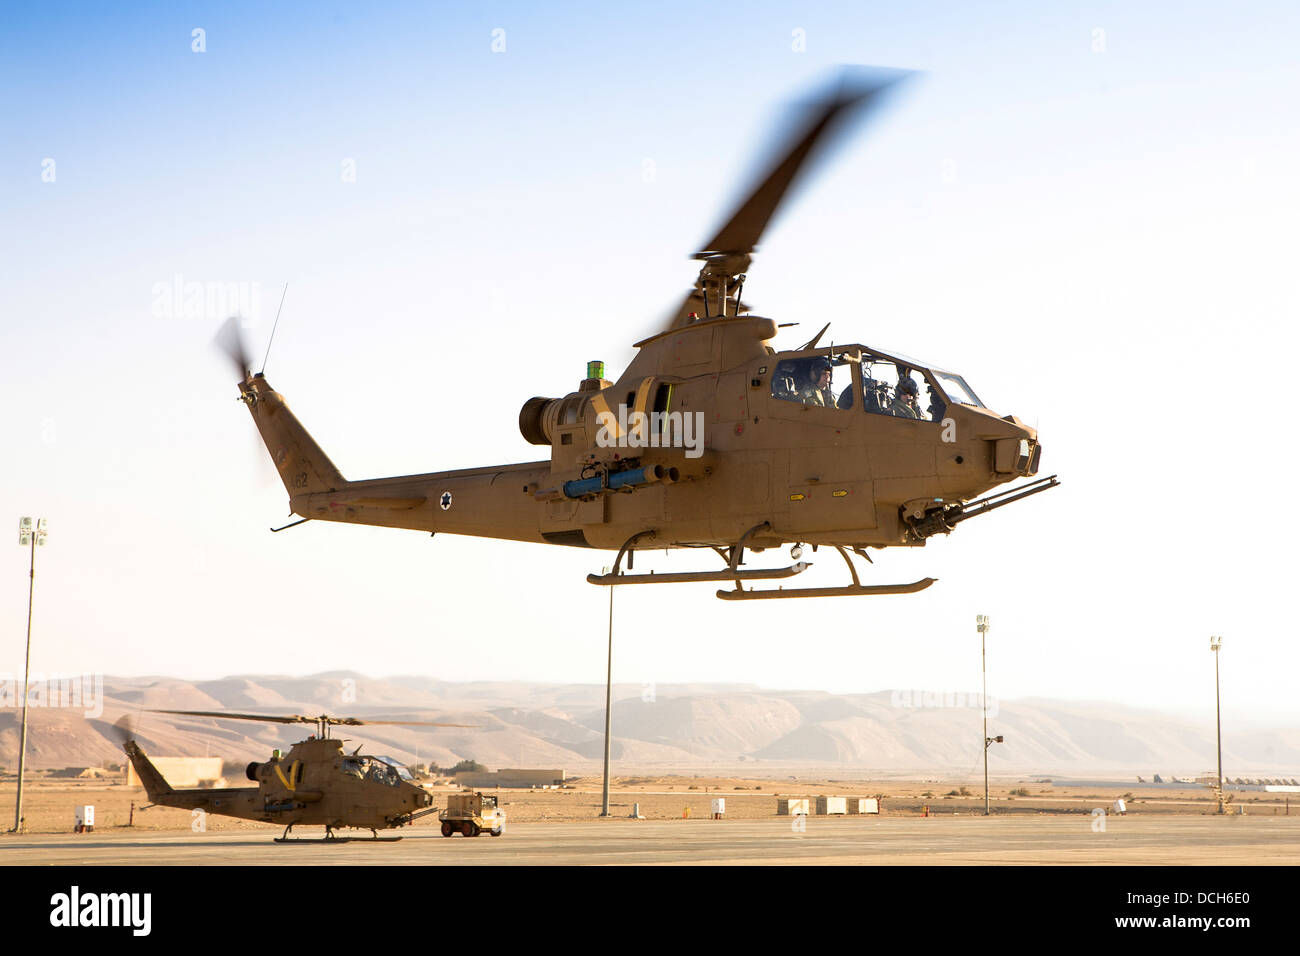 Israeli Air force (IAF) helicopter, Bell AH-1 Cobra in flight Stock Photo